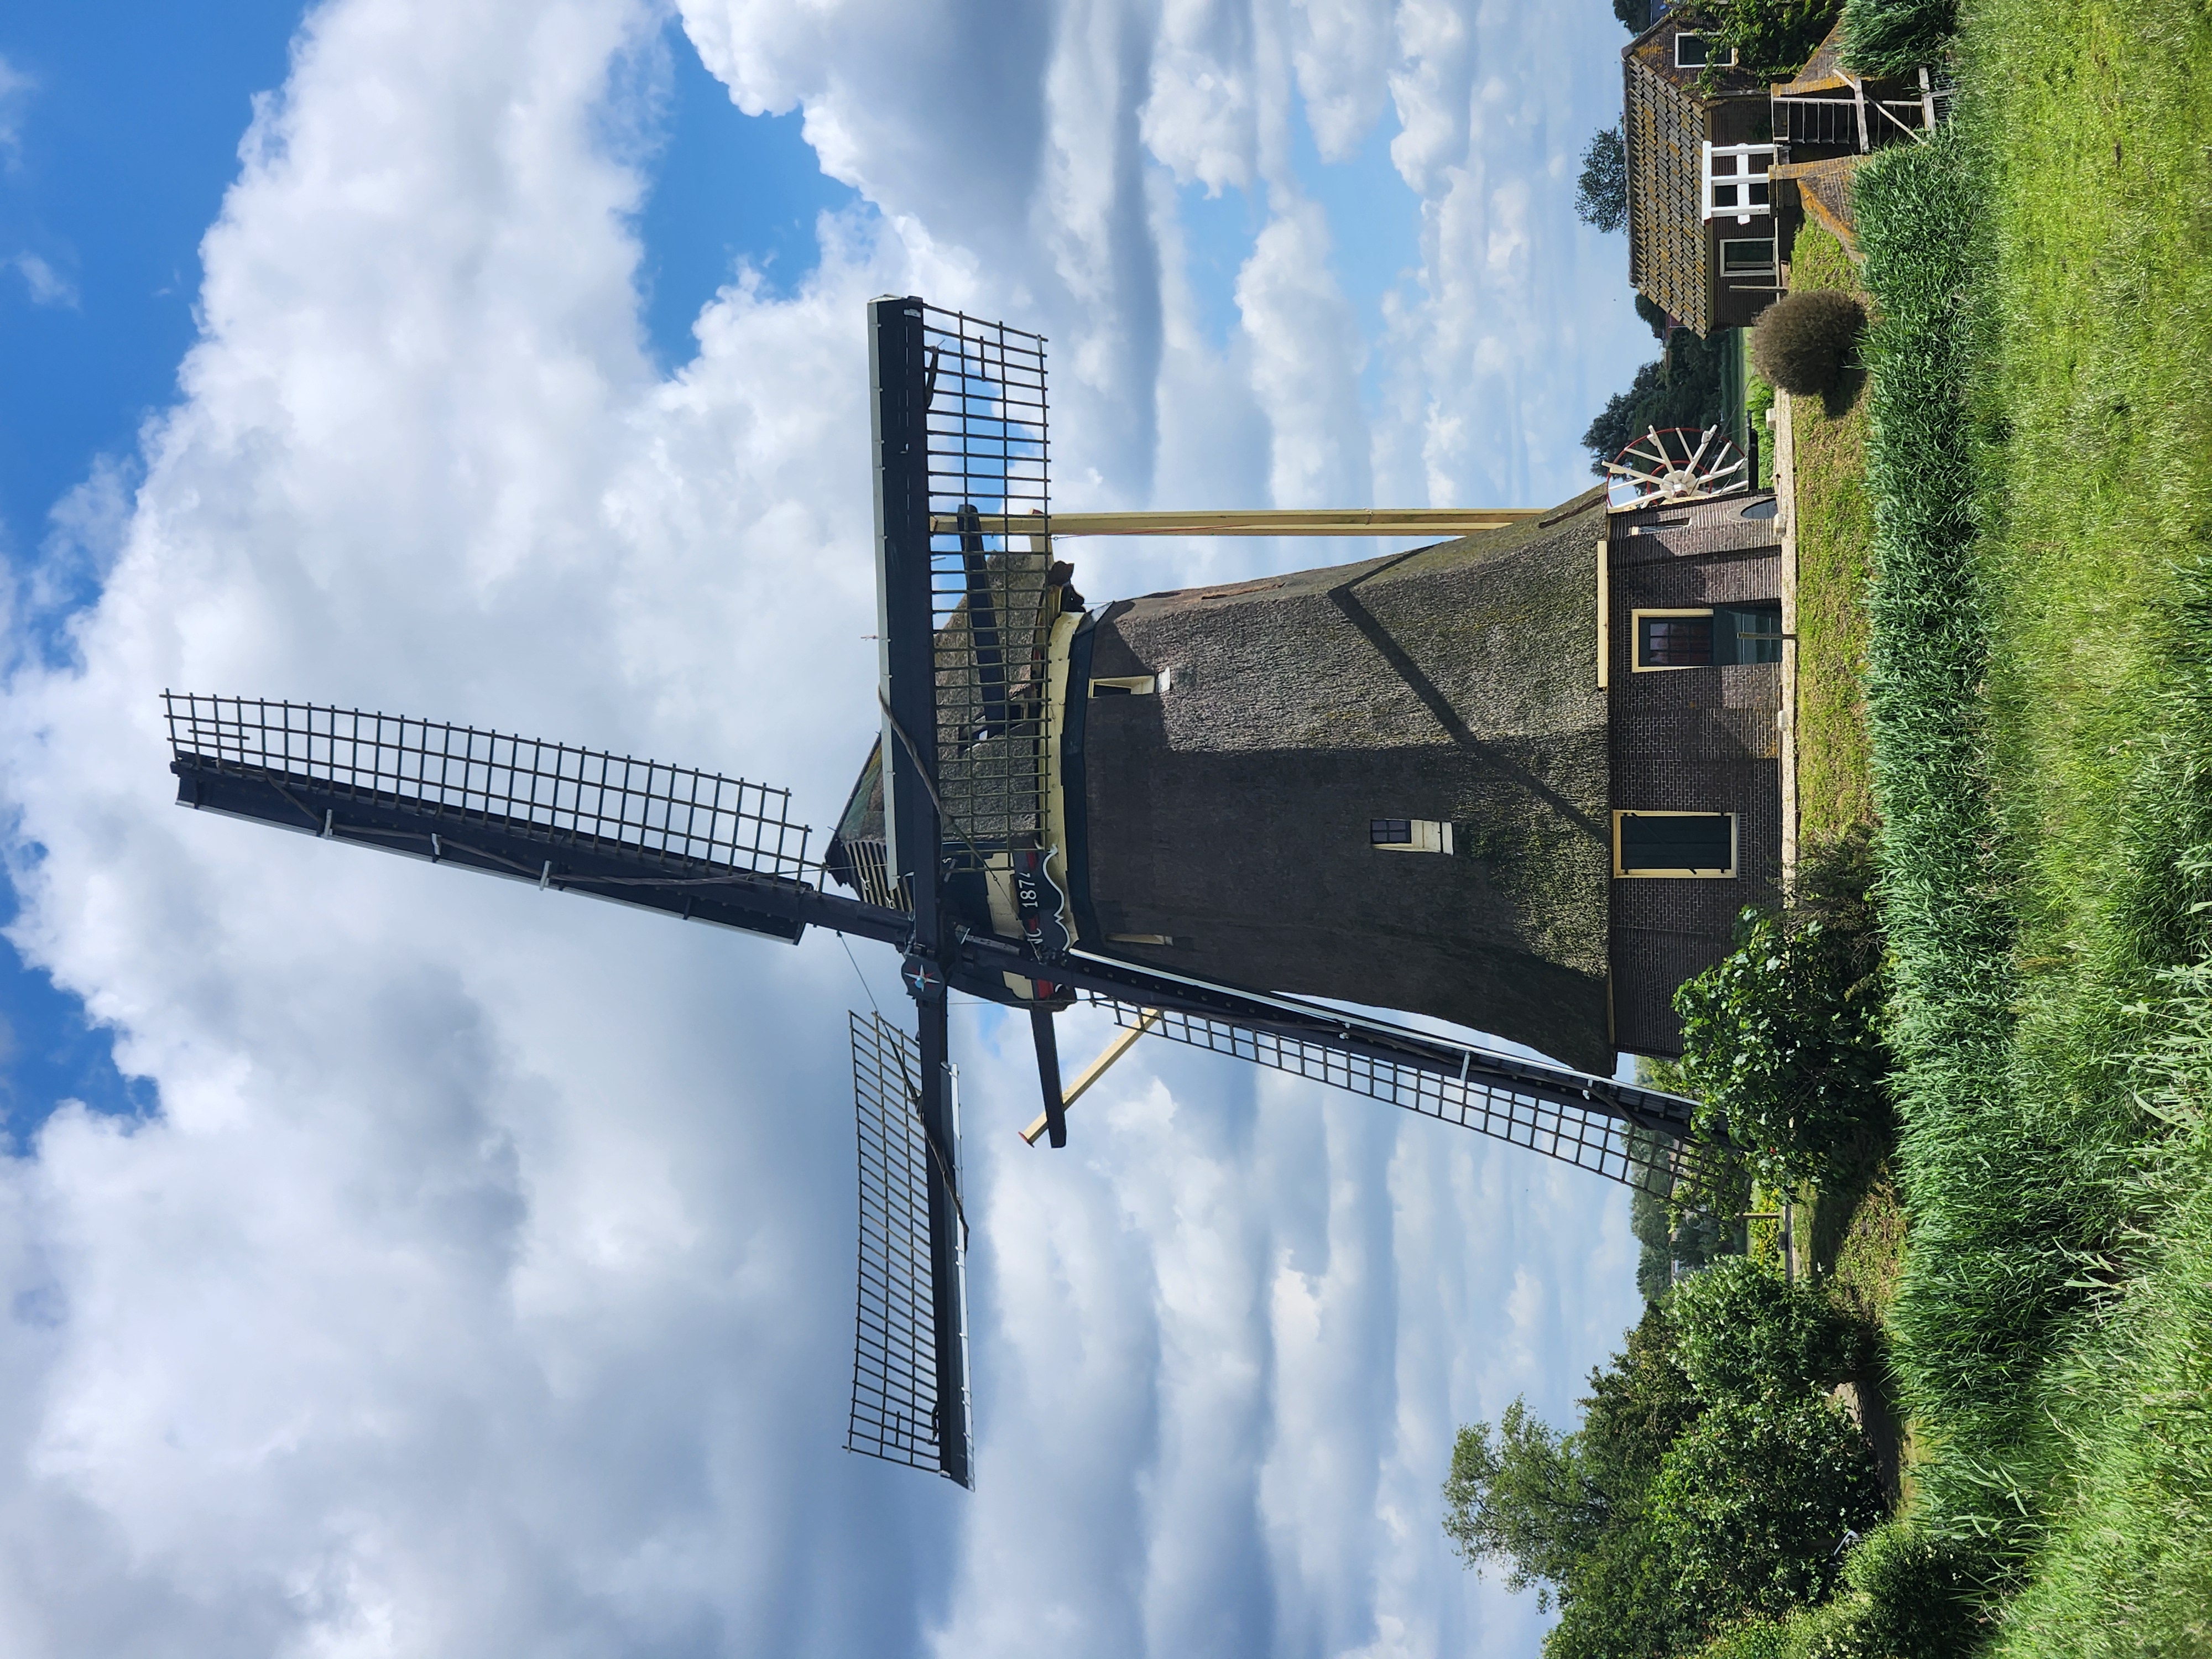 A windmill. The sails are furled, the sides are made of thatch